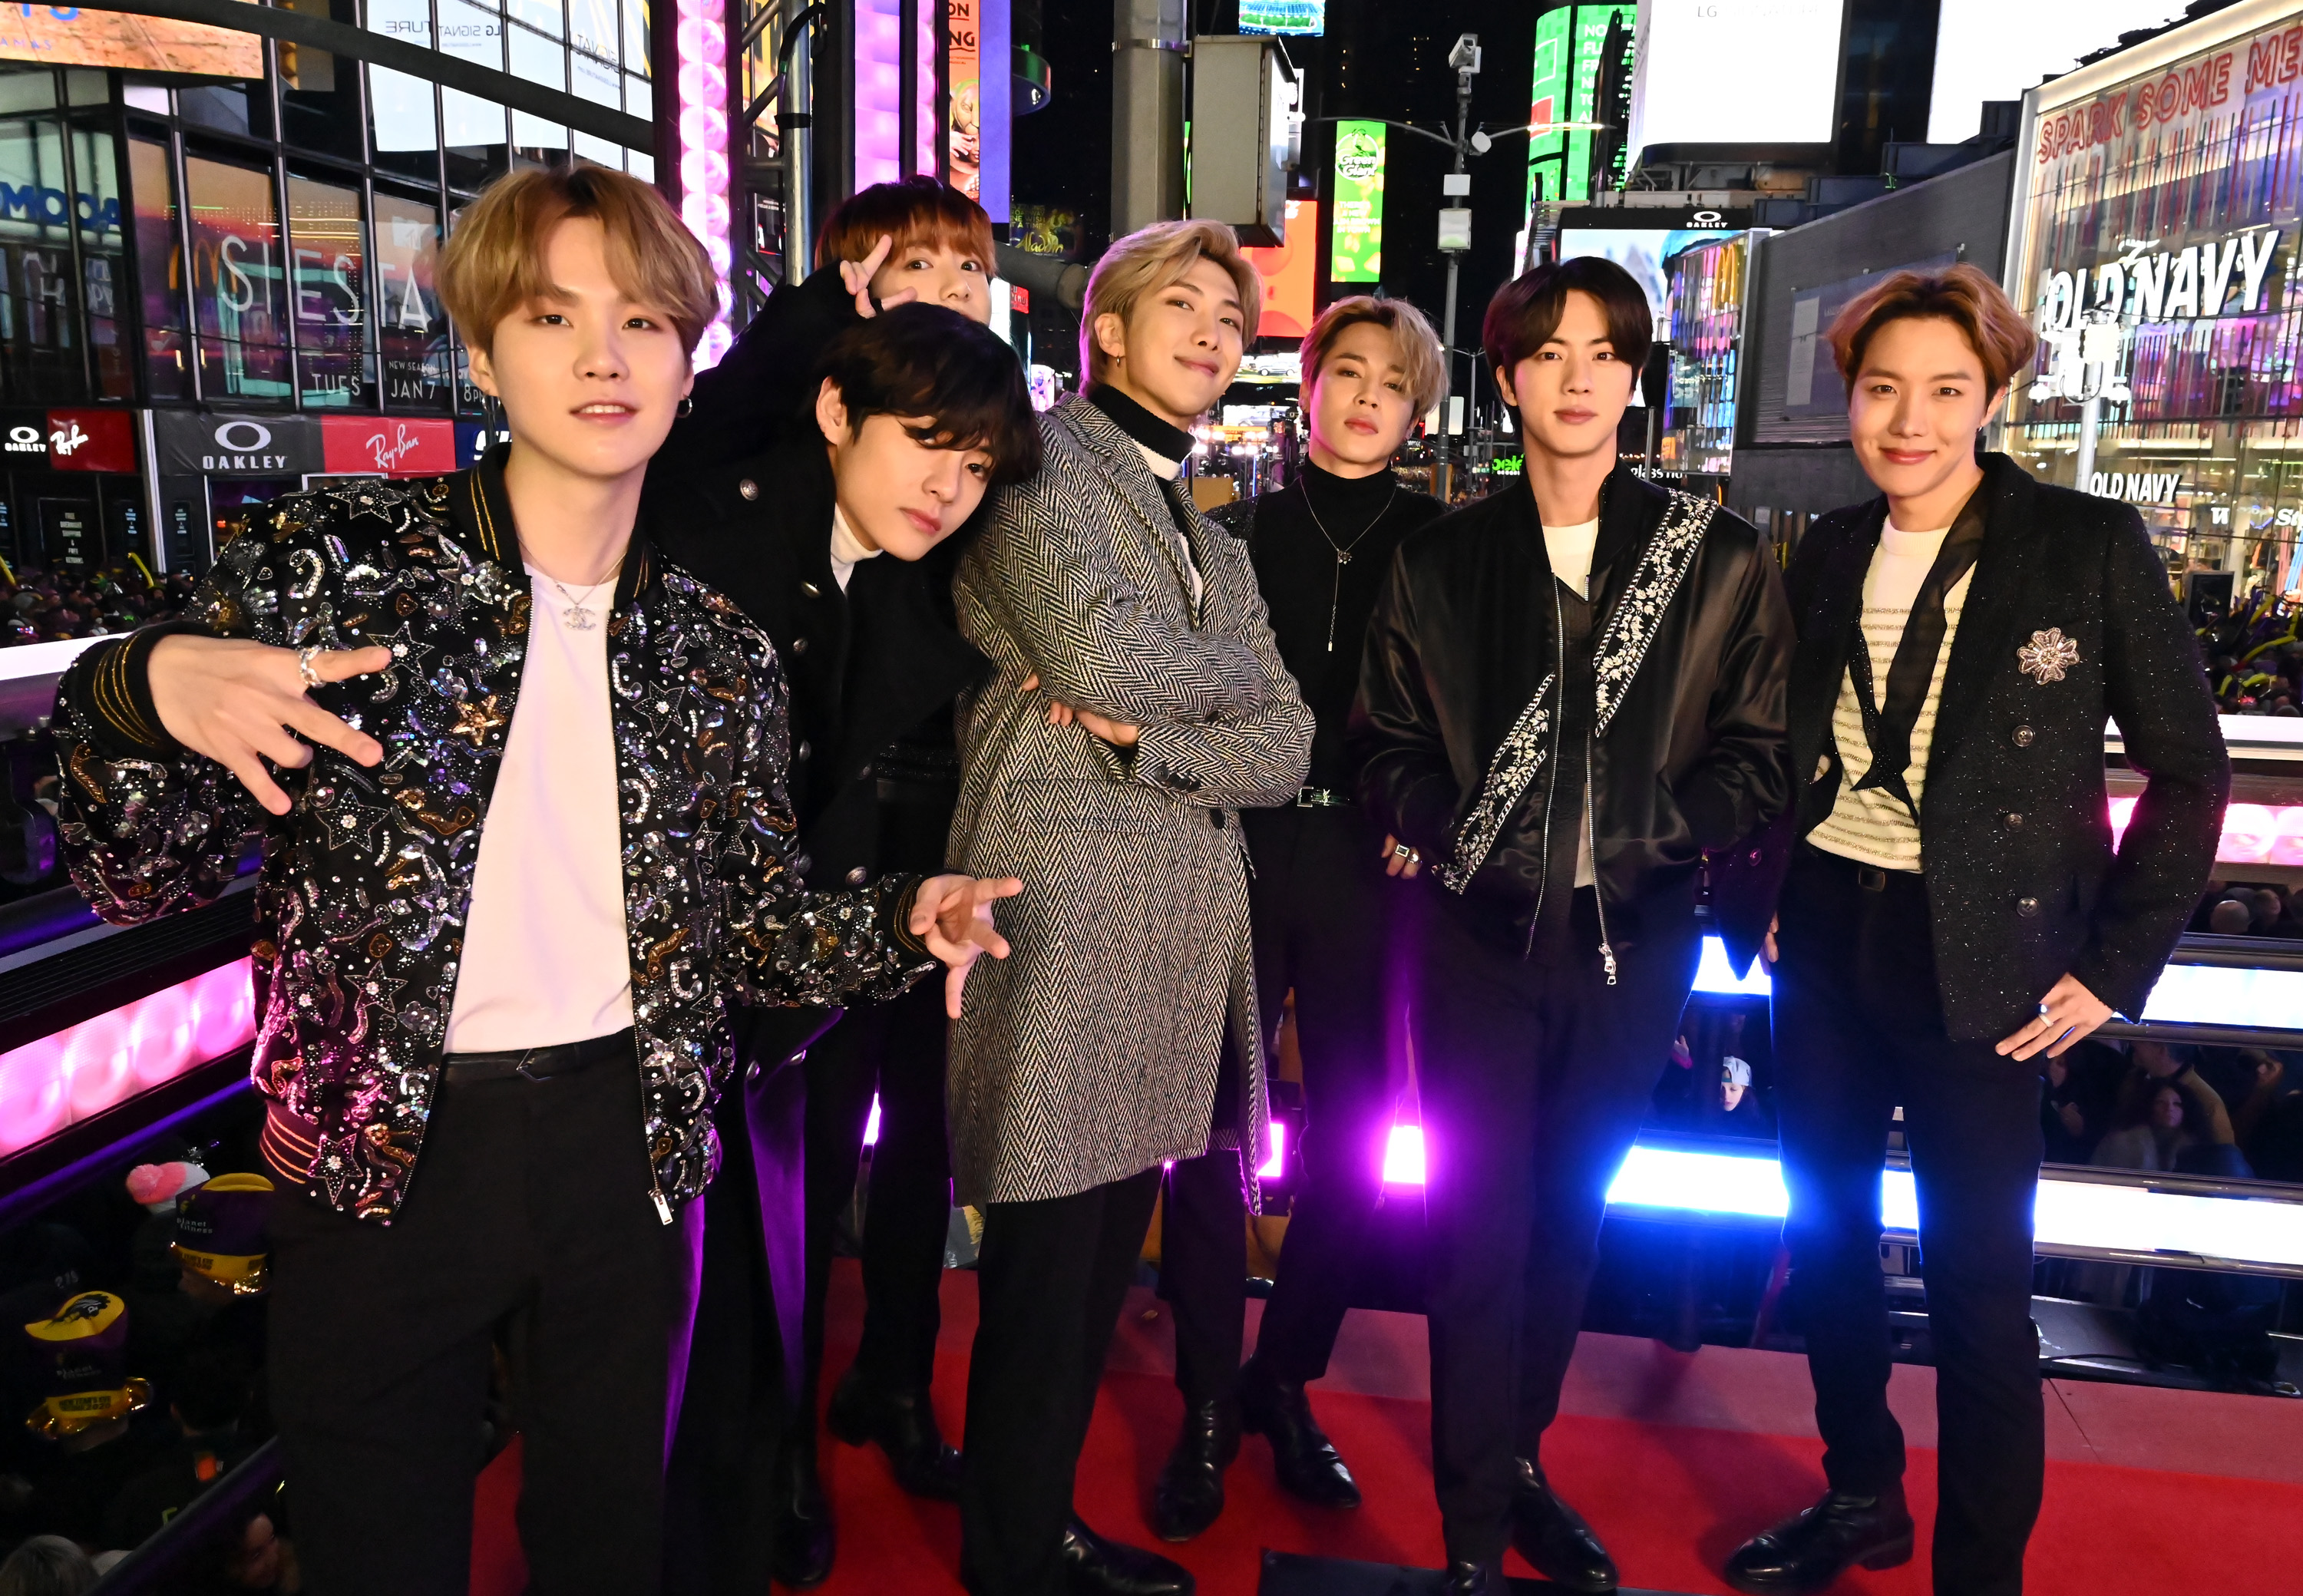 EXCLUSIVE: ARMY share how BTS is helping them cope with anxiety during the lockdown period due to COVID 19